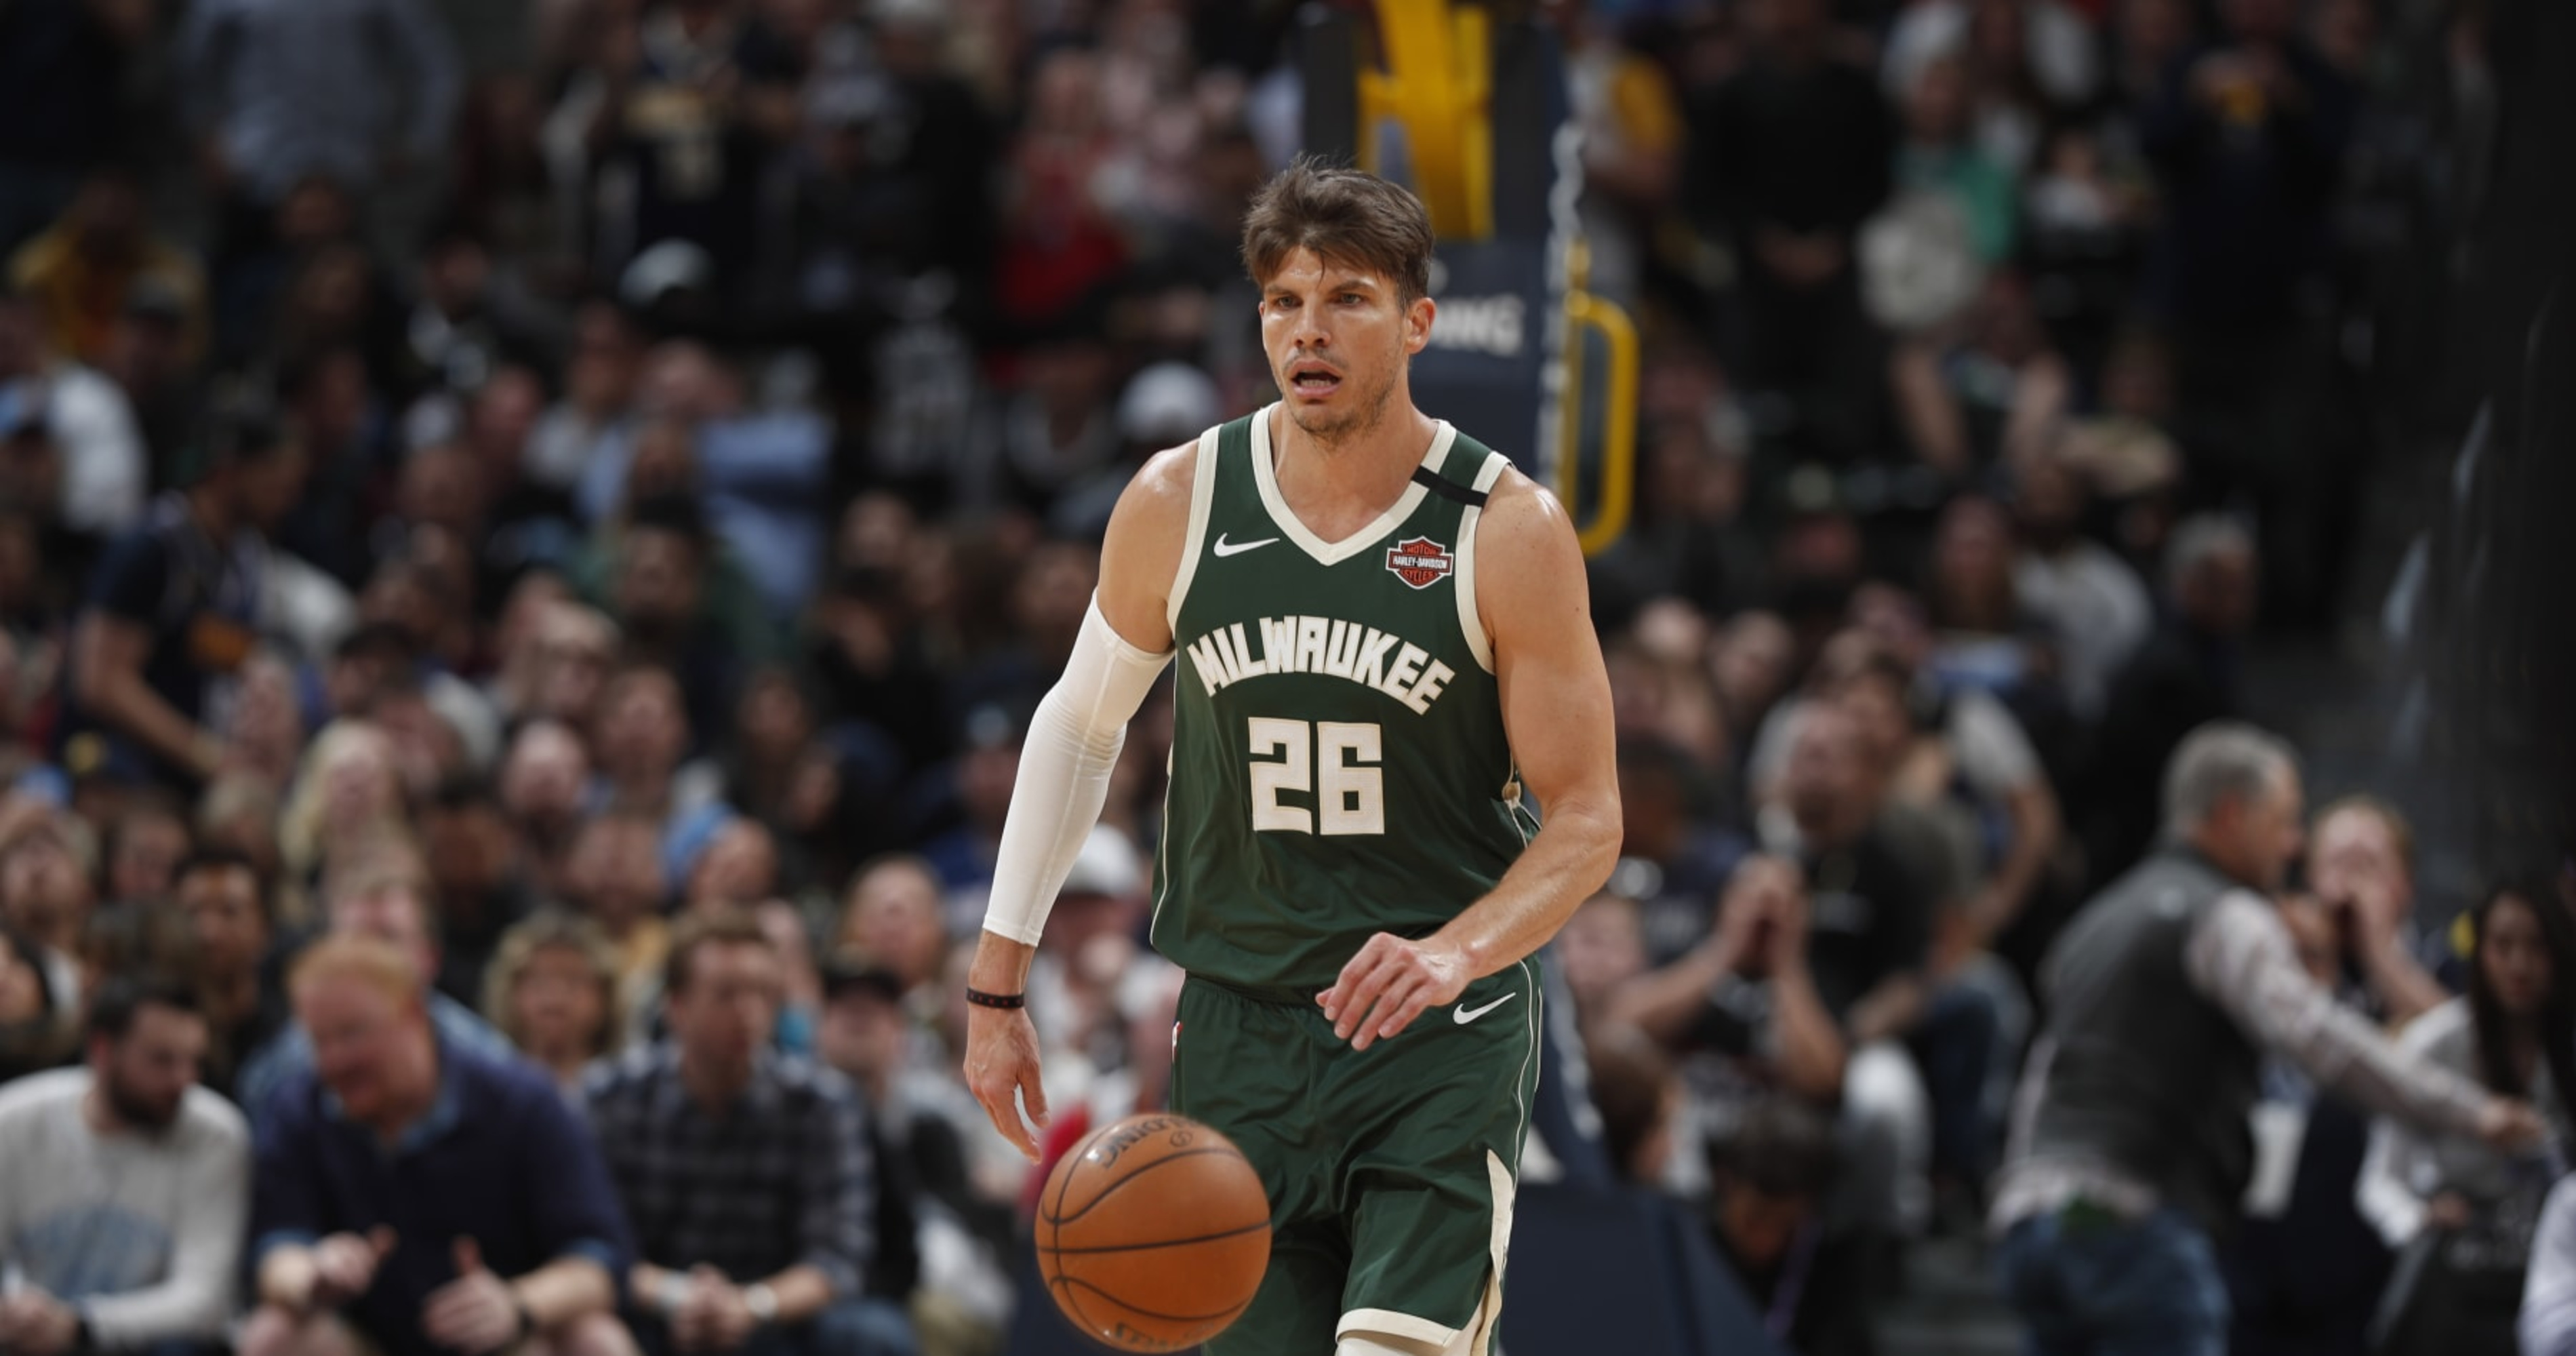 Report: Kyle Korver to re-sign with Hawks - Detroit Bad Boys